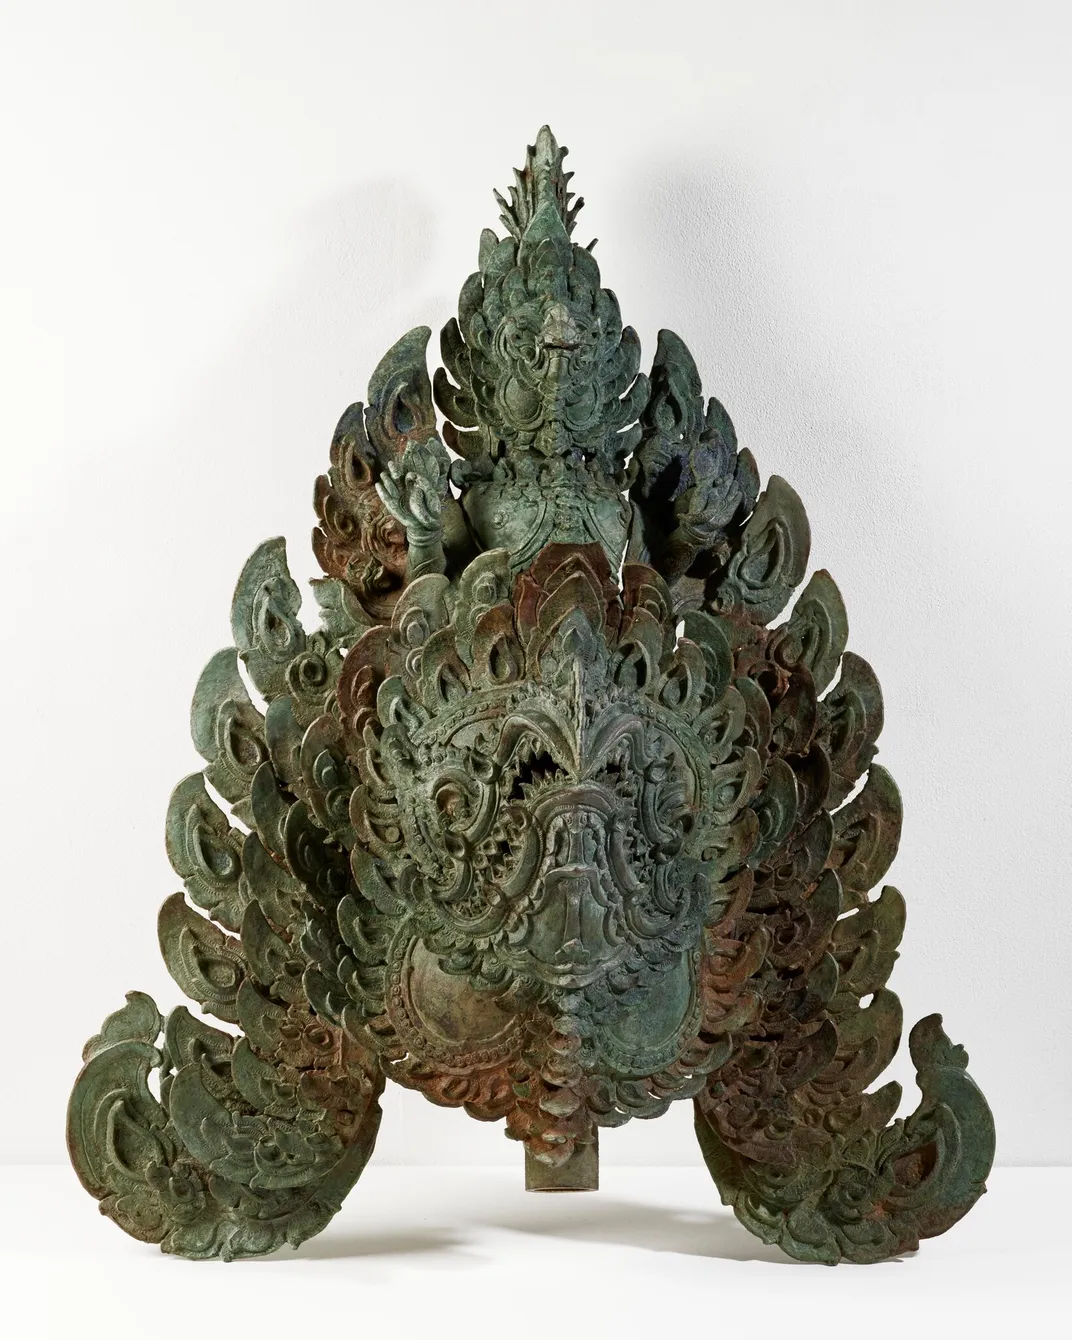 A bronze decoration from the late 12th century